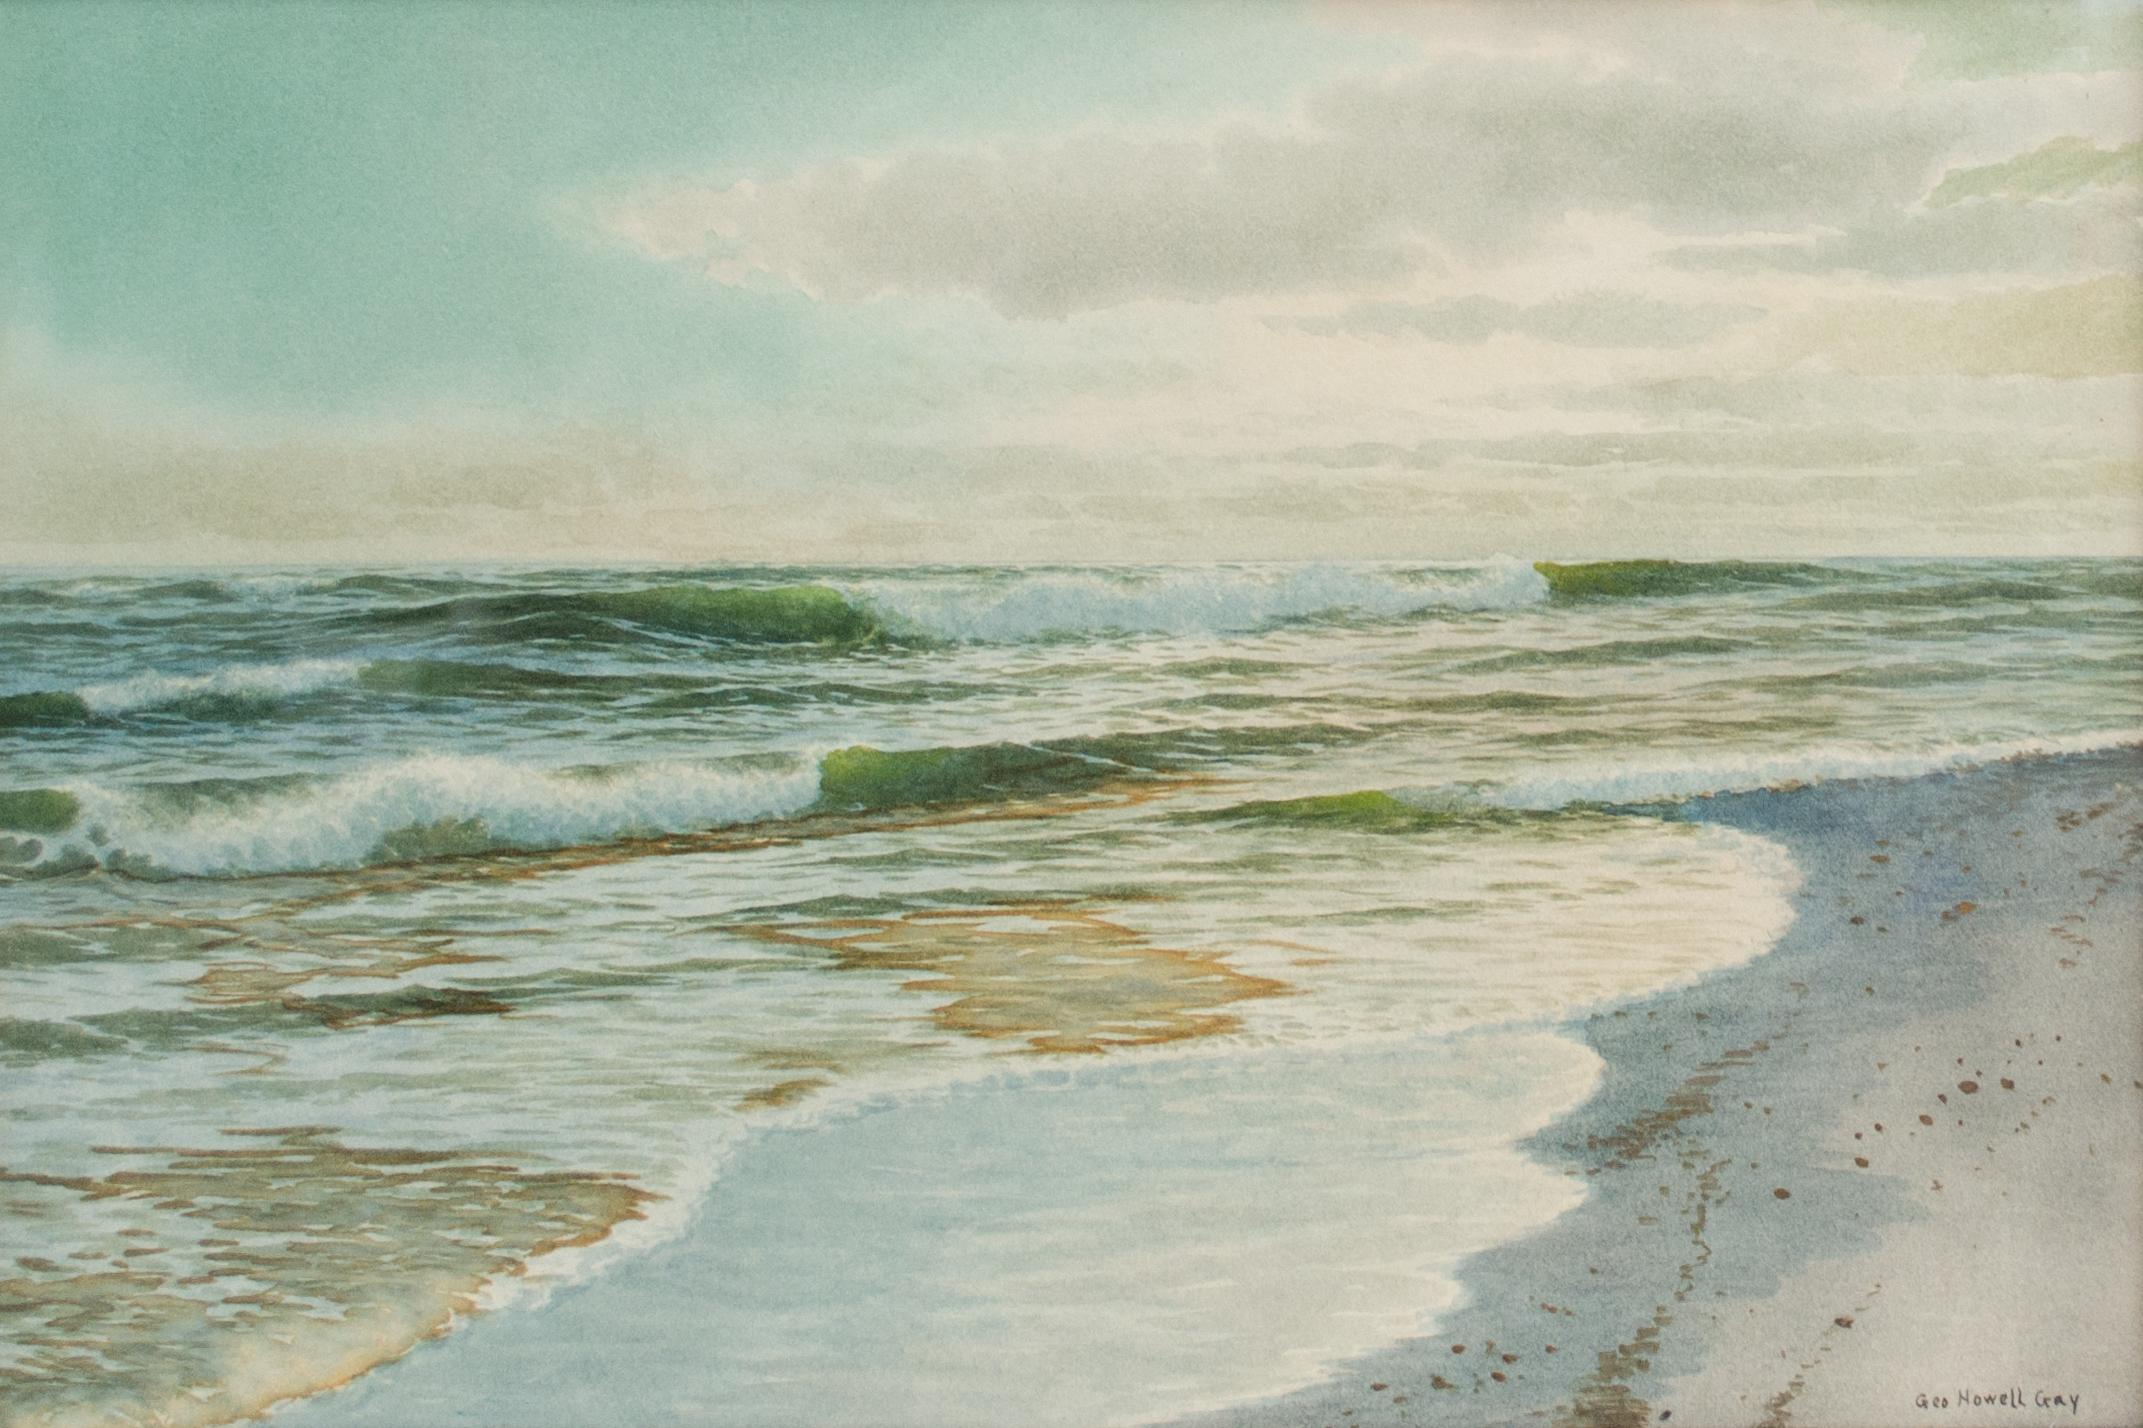 Seascape Watercolor Painting by George Howell Gay (American, 1858-1931)